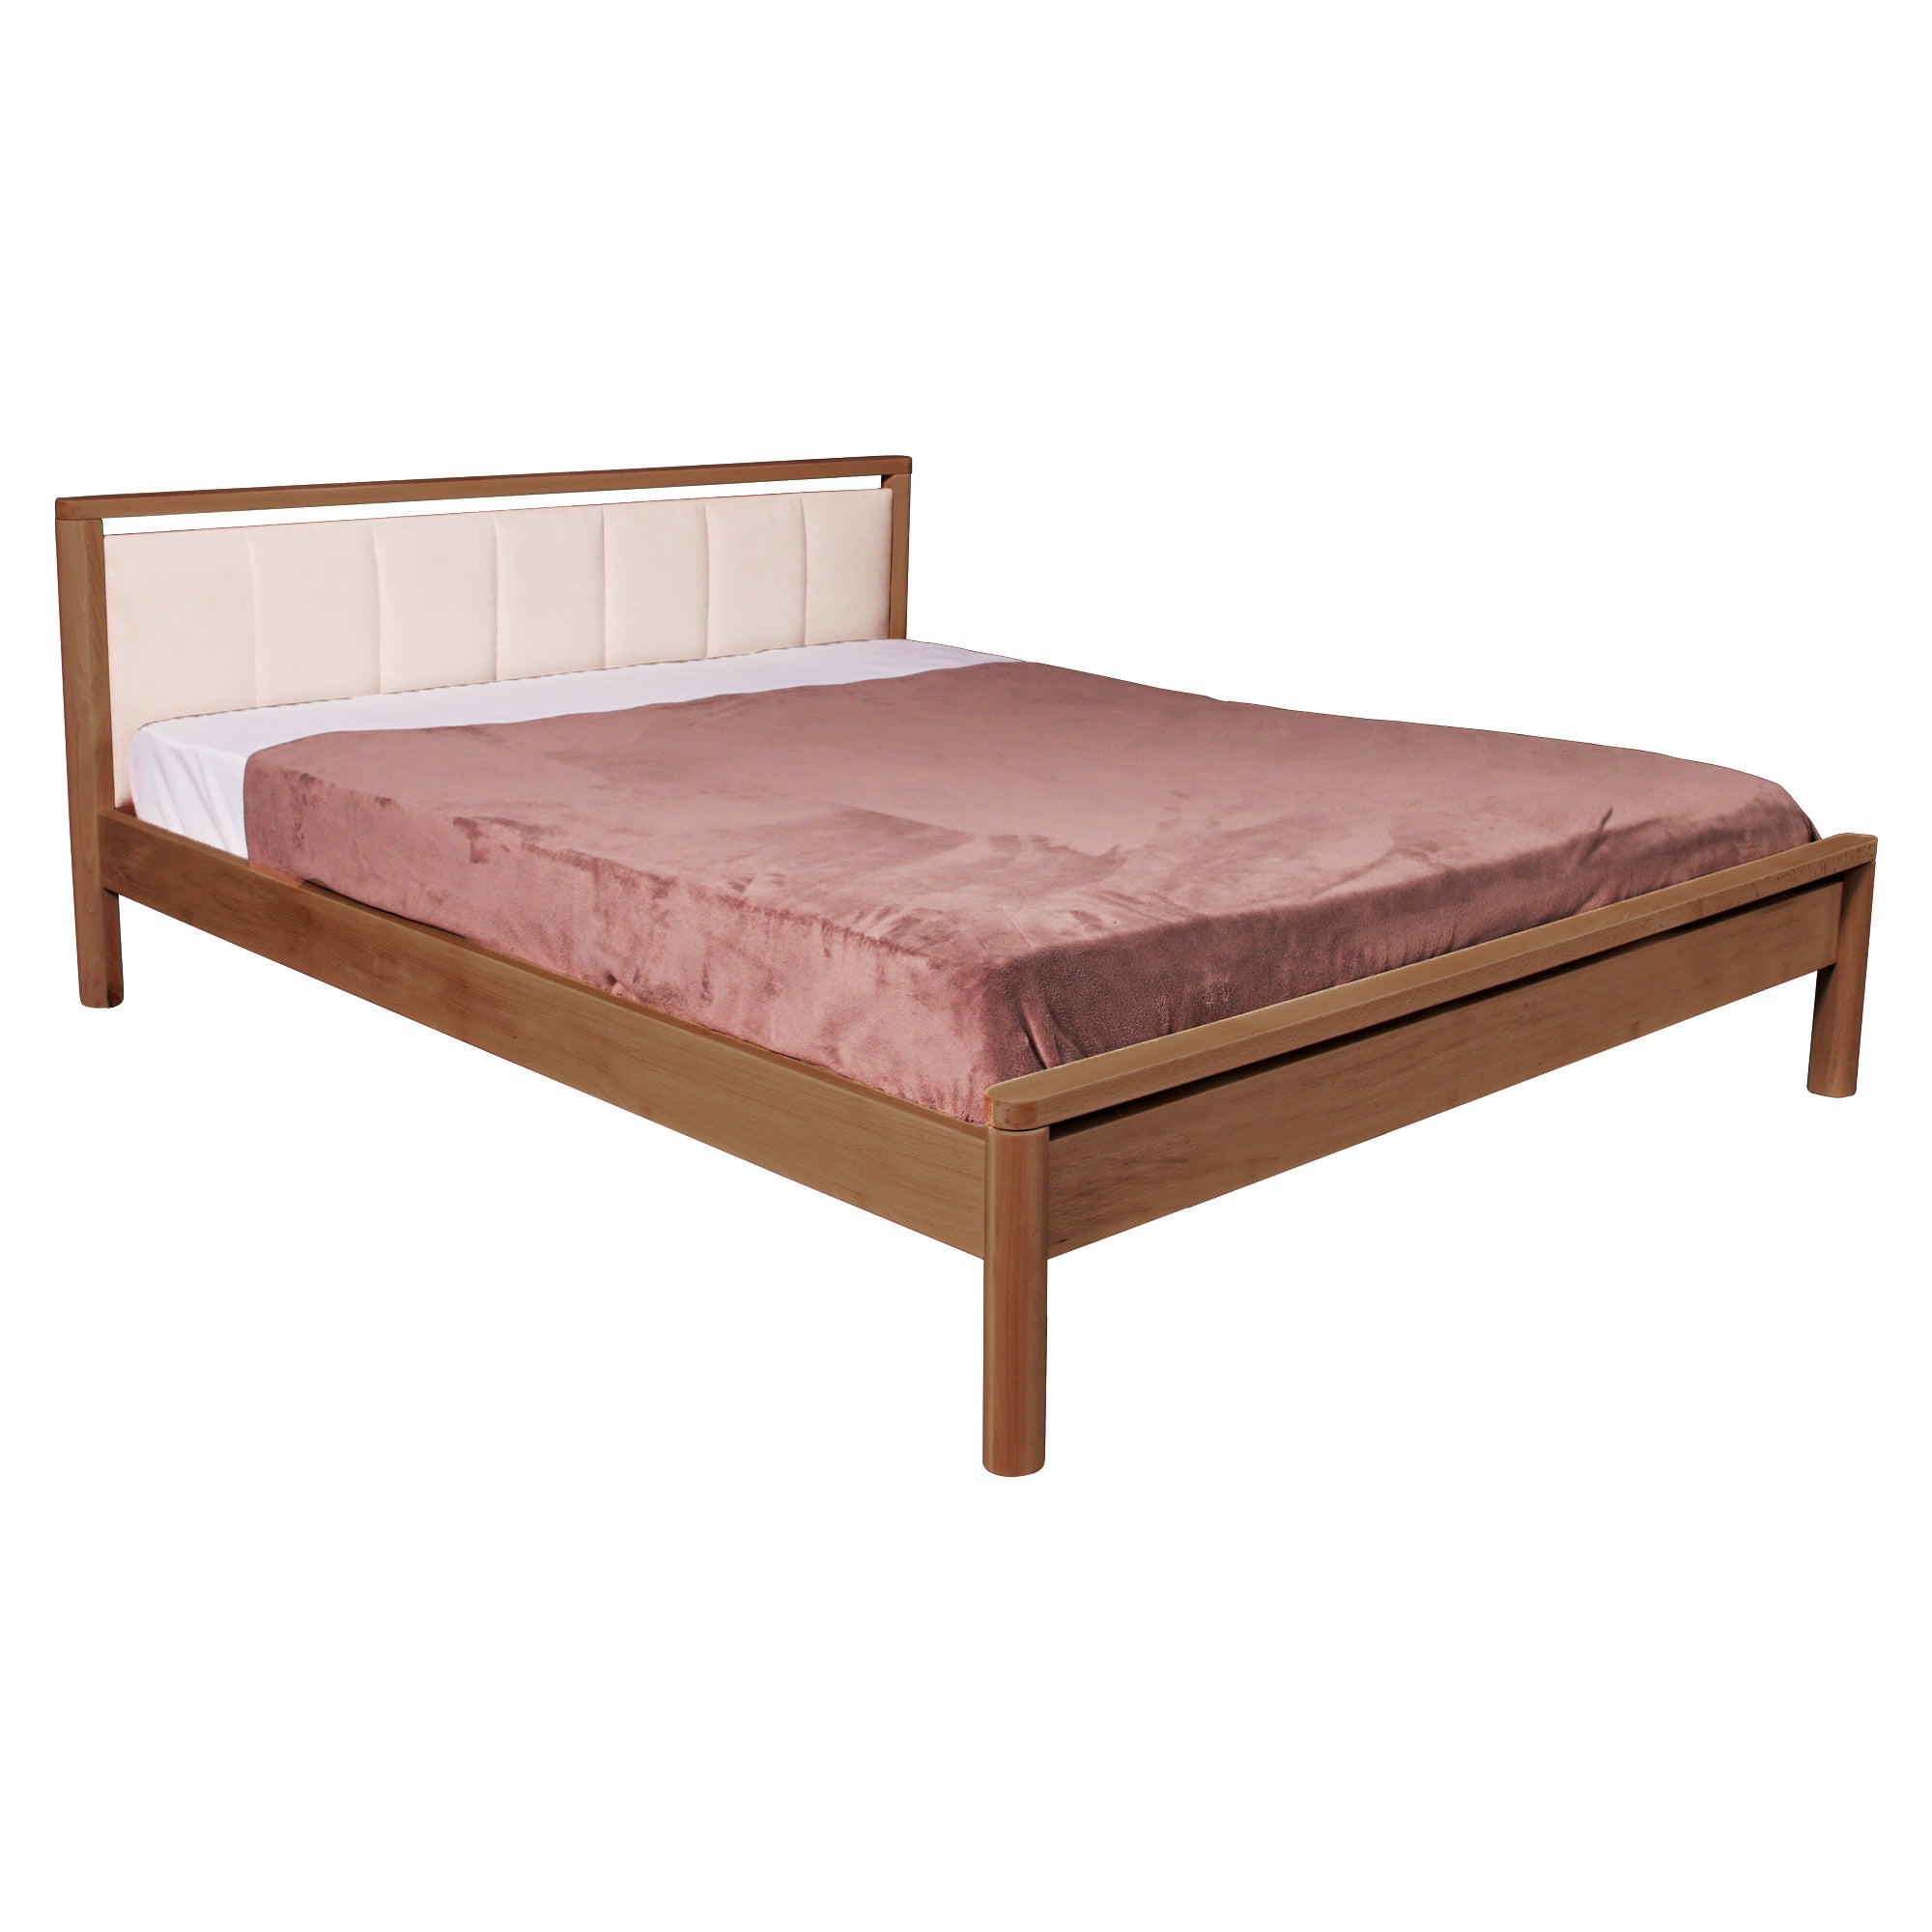 DROP SOFT Double Bed Natural Wood Beech Frame with Upholstered Headboard